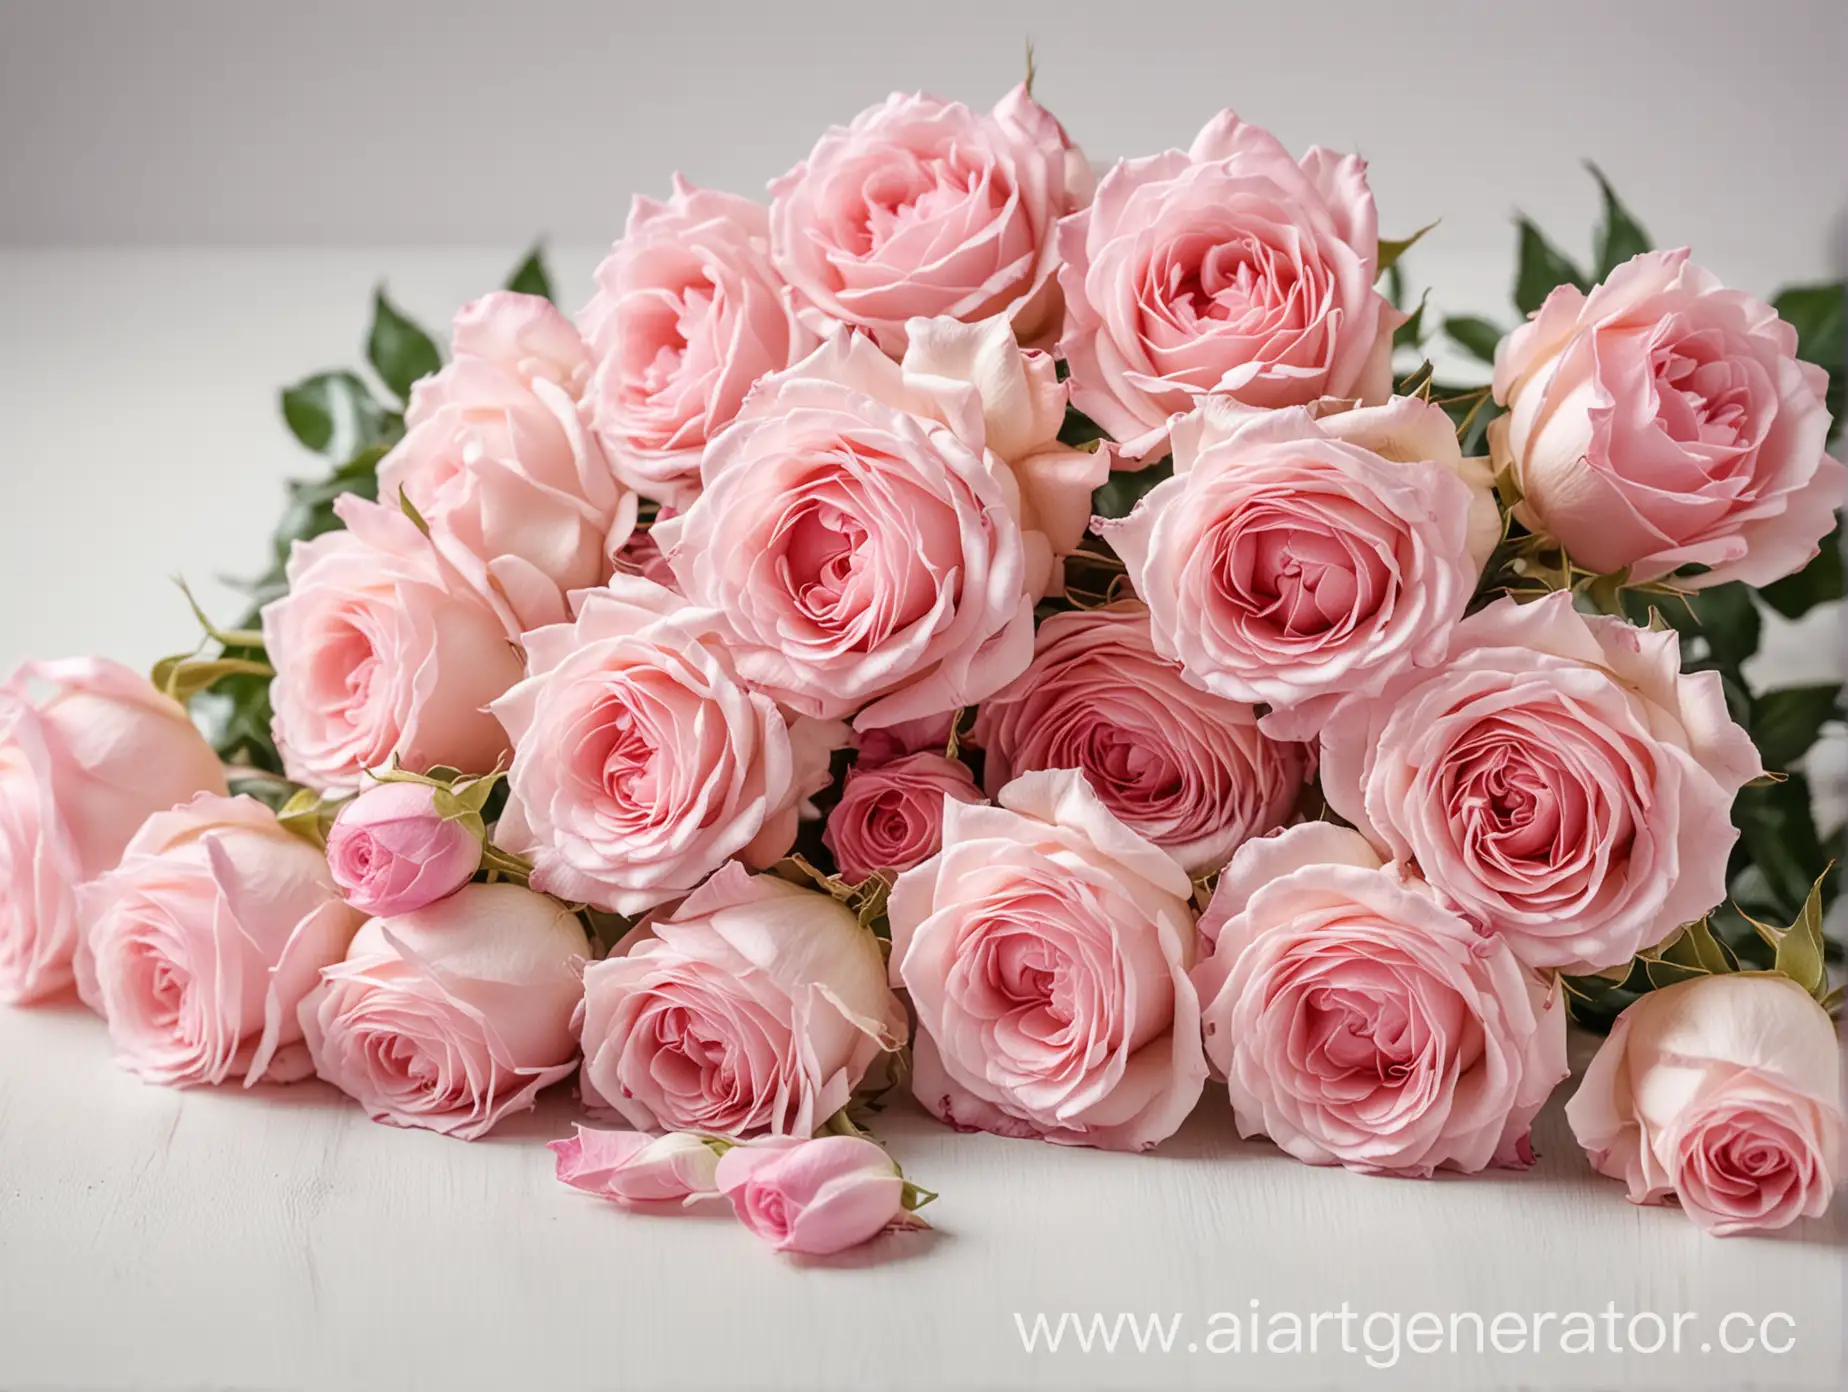 CloseUp-of-Pink-Roses-on-Table-with-Blurred-White-Background